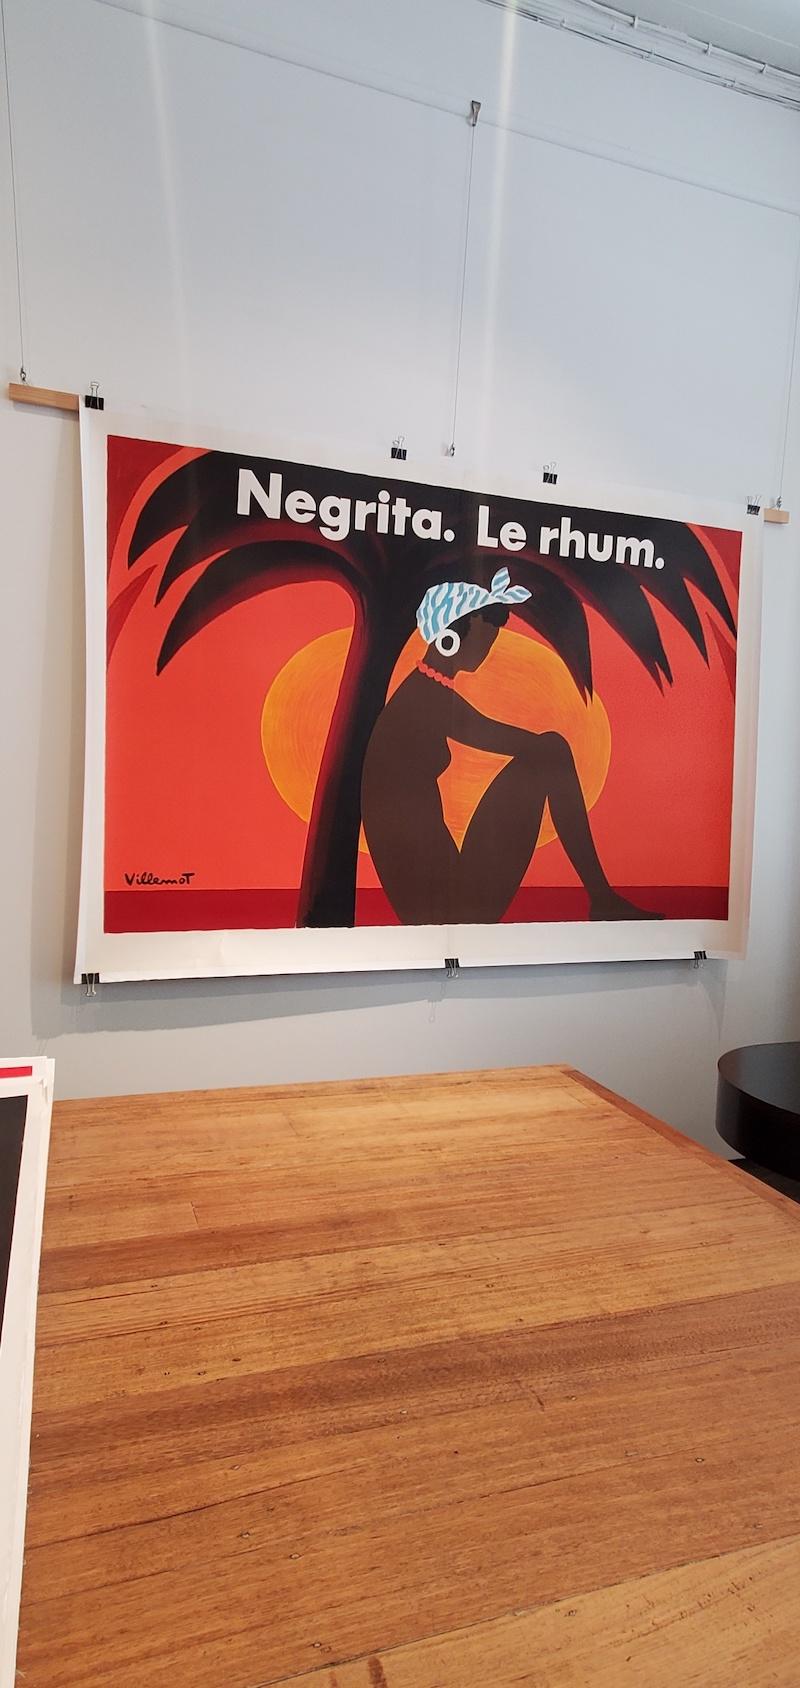 Rare original French Advertising Poster 'NEGRITA' Double Sheet, 1974 by Villemot

A rare poster by Bernard Villemot from 1974, this poster is in excellent condition. It has been linen backed for preservation. The colours are vibrant.